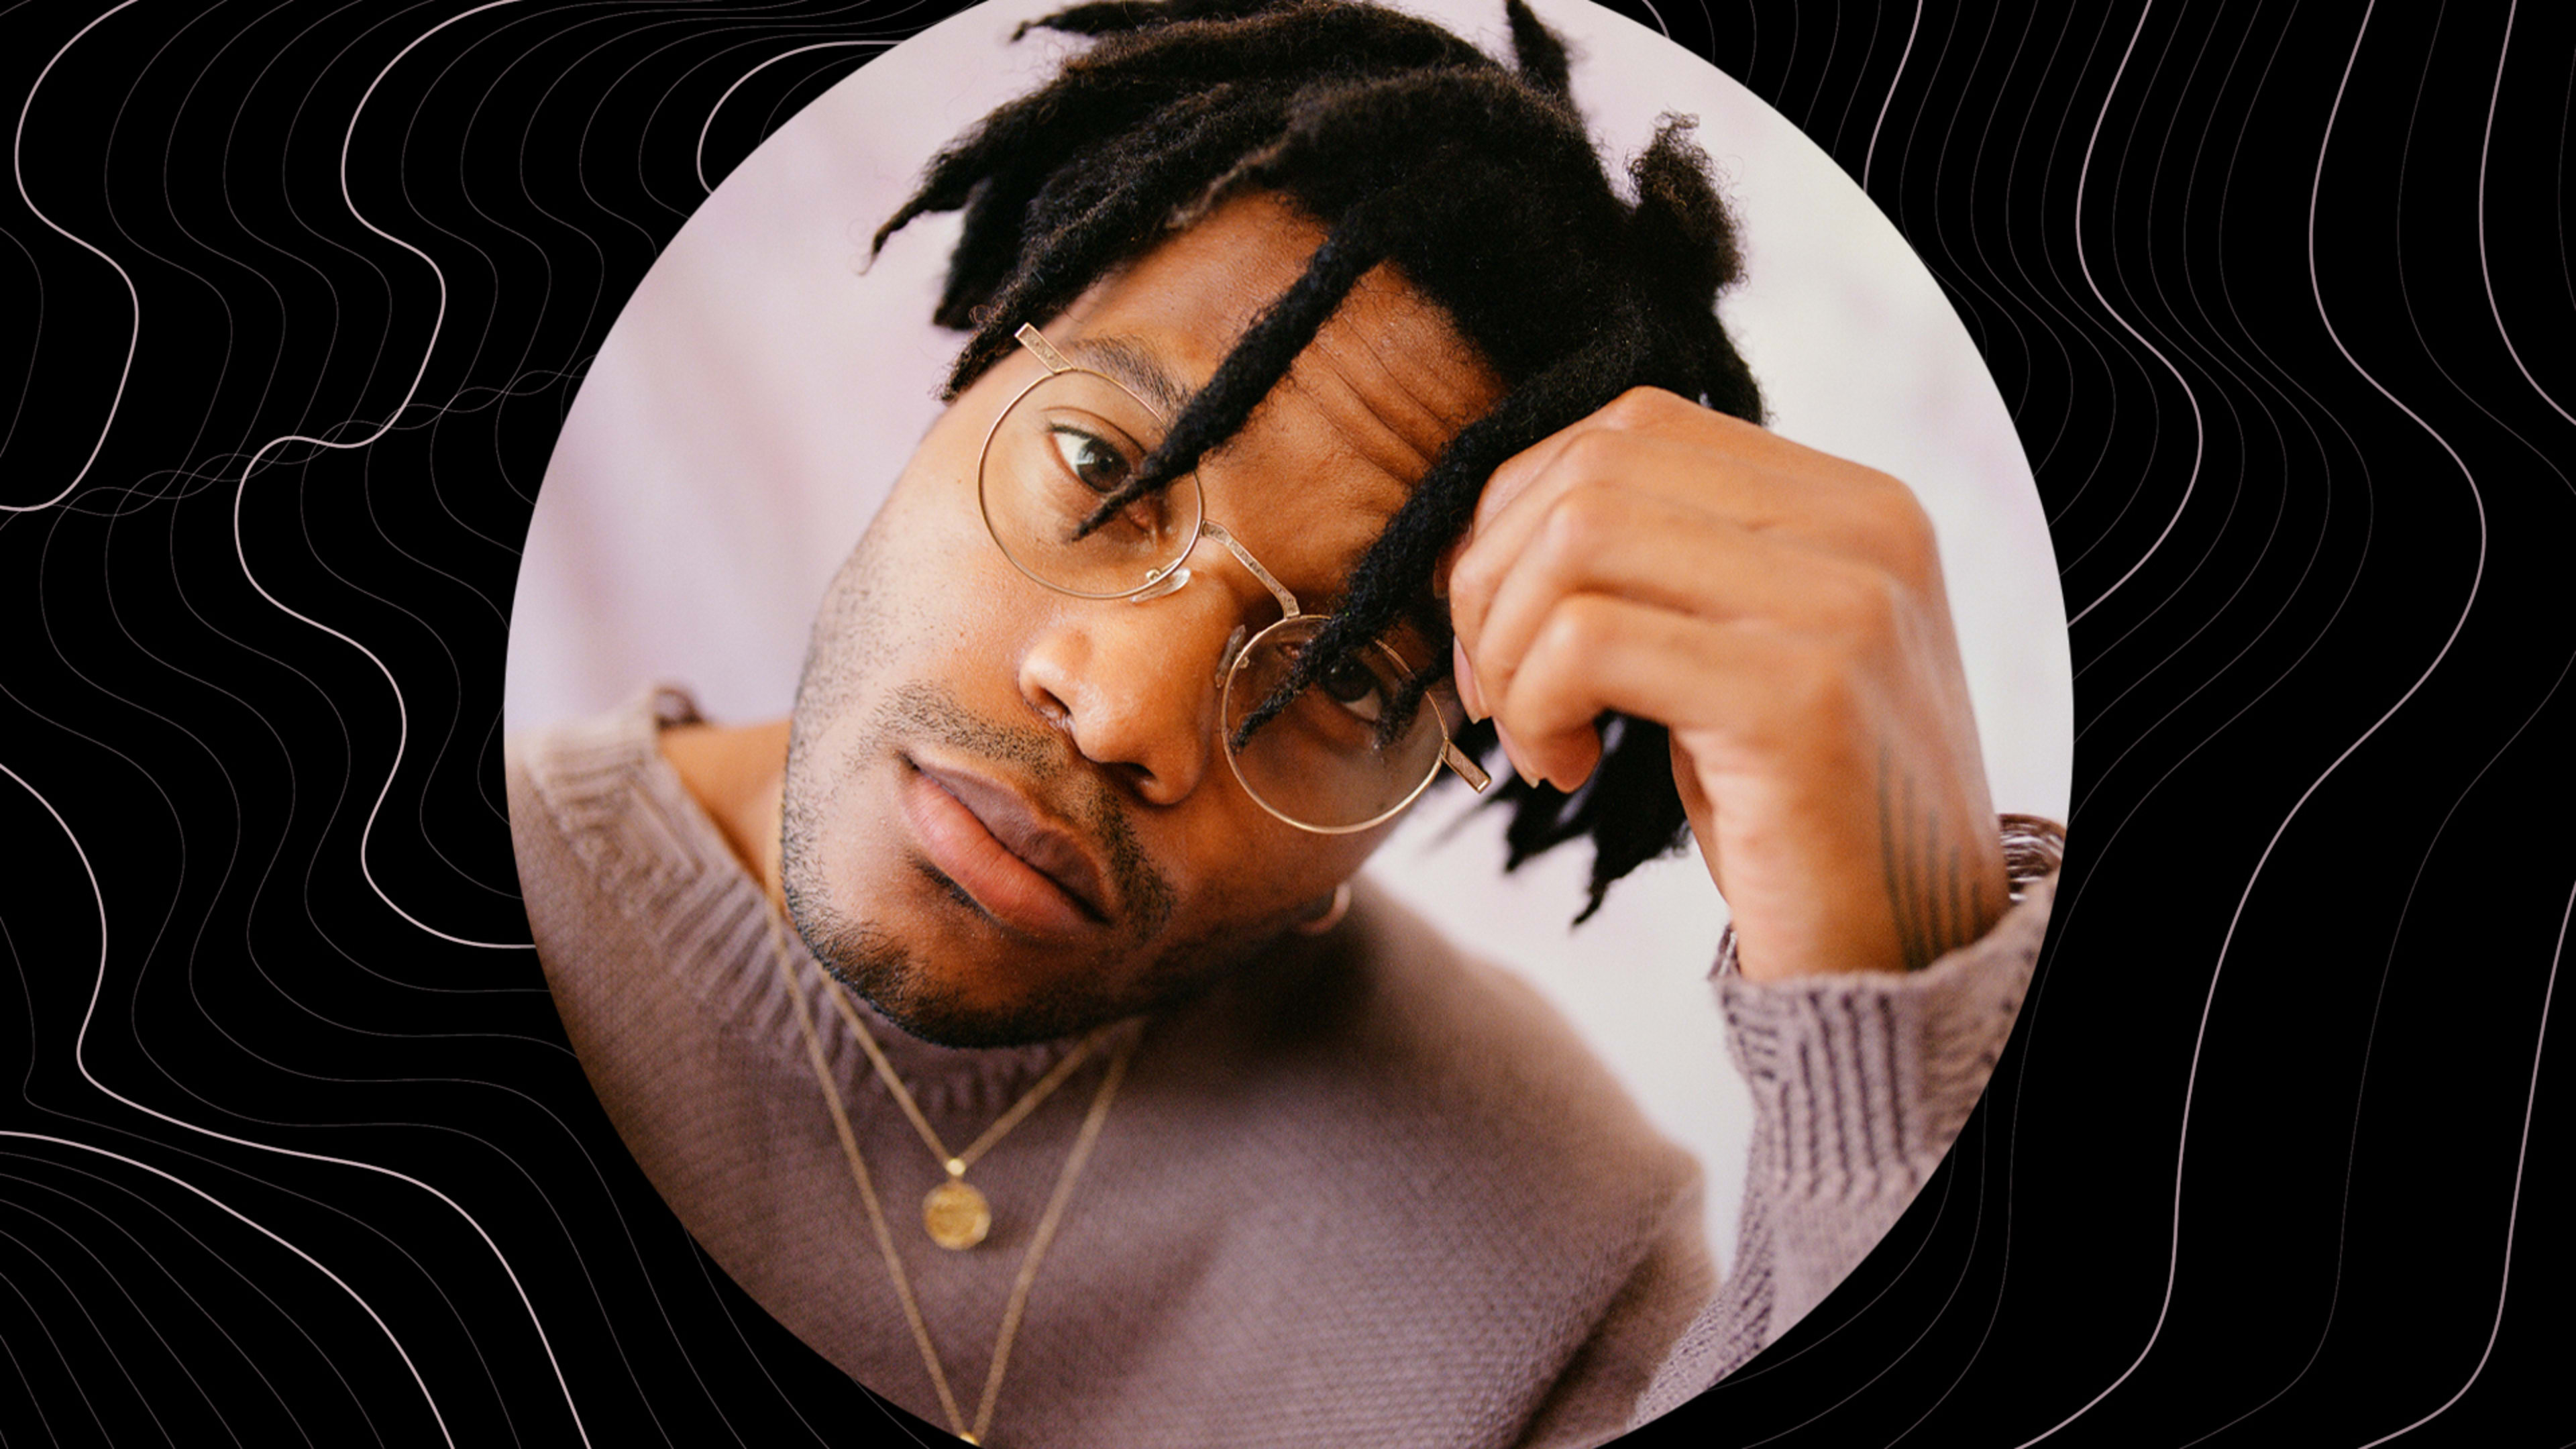 How Jermaine Fowler is fighting past pain to find his funny again